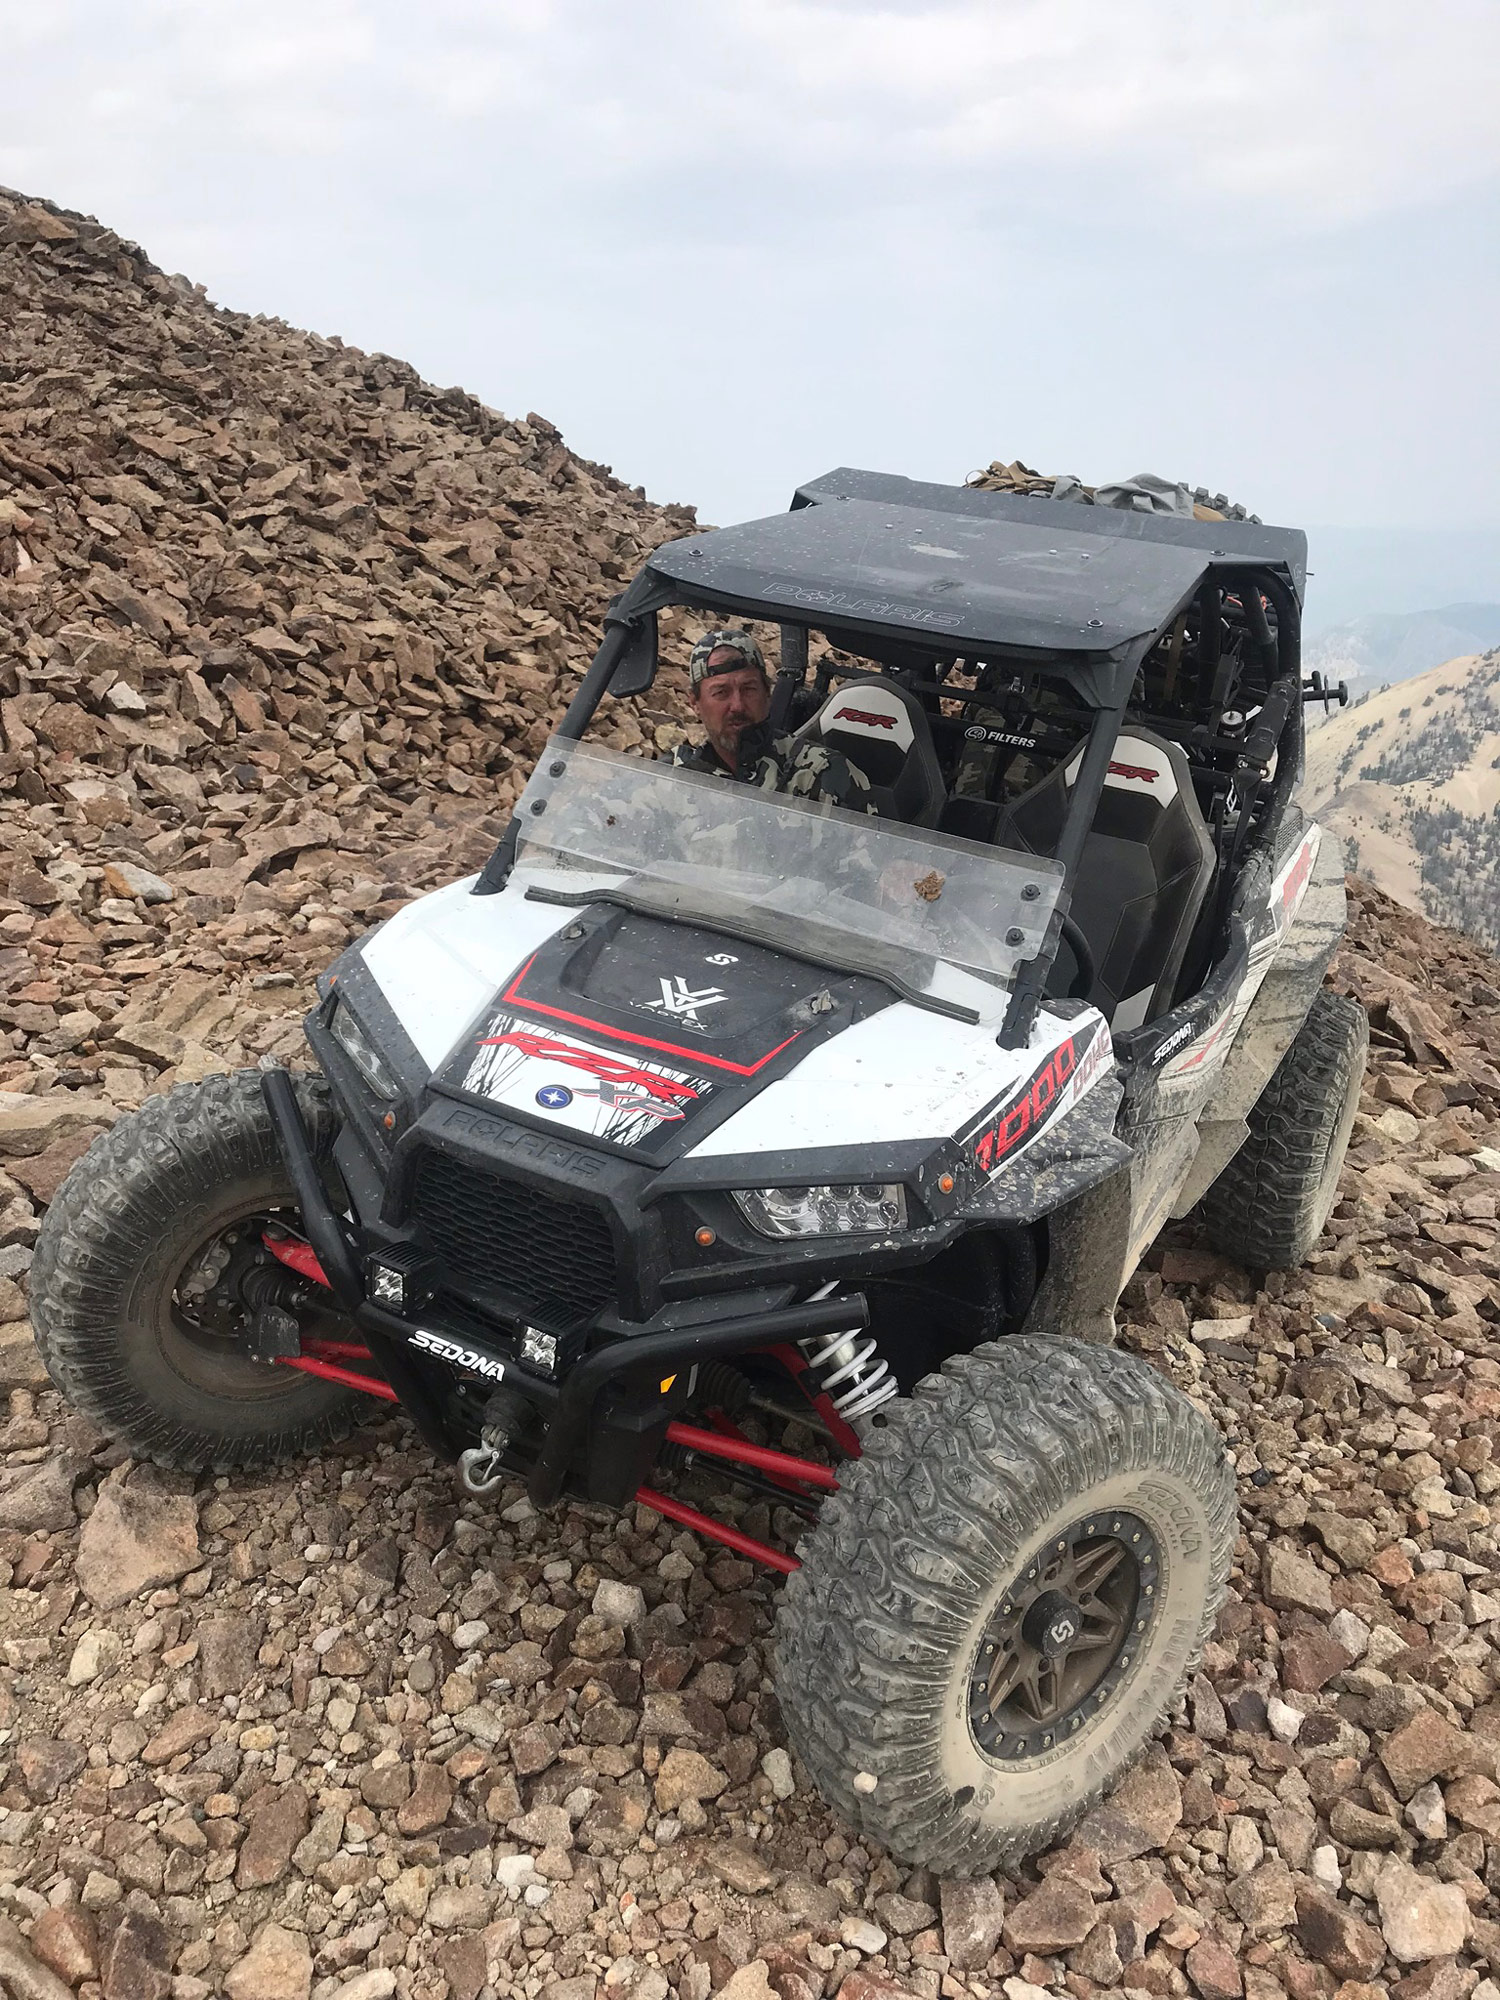 Driving a hunting UTV through the mountains